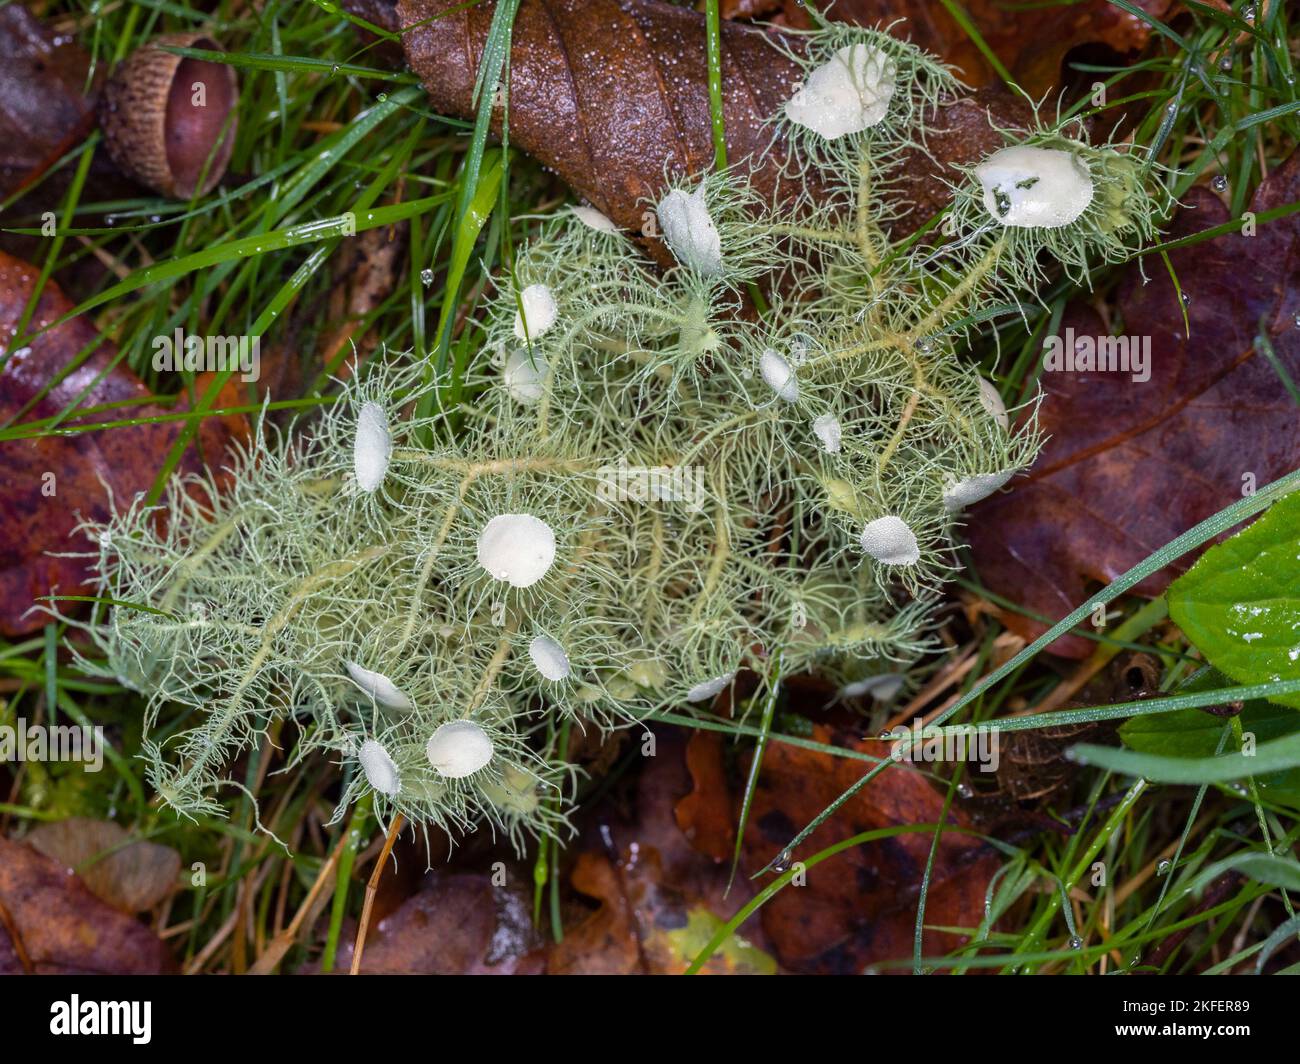 usnea florida lichen in the woods with blurred background Stock Photo